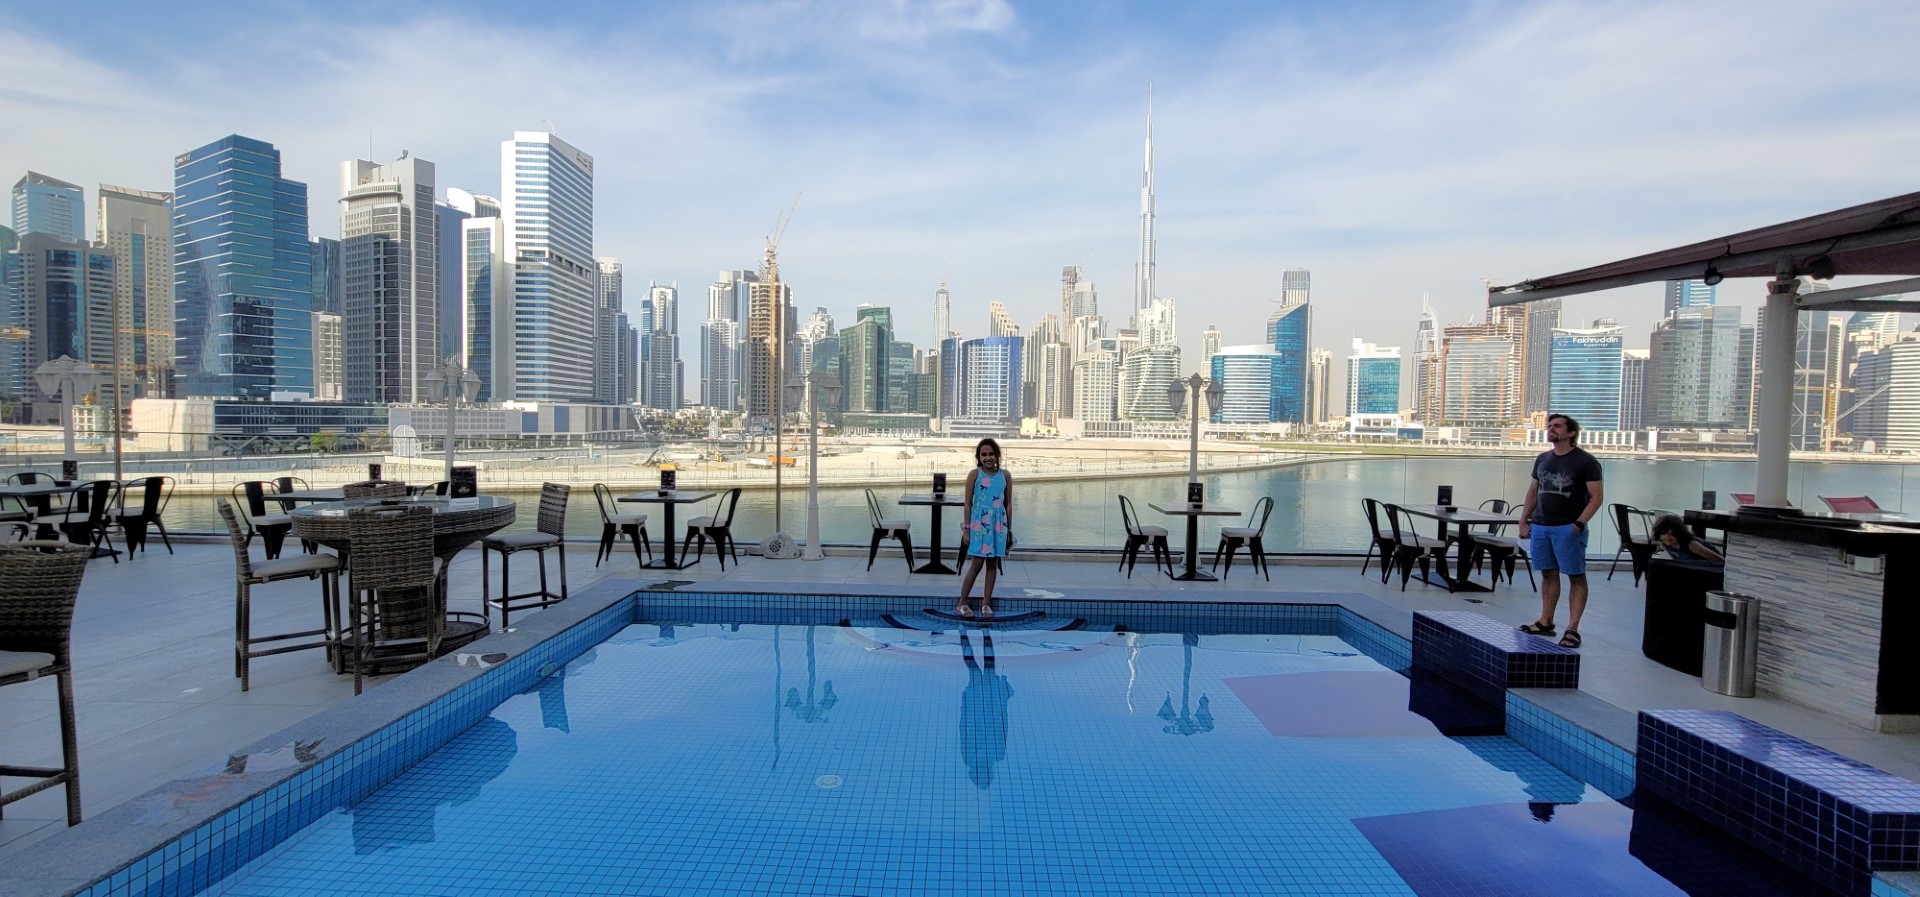 child standing by pool with Dubai skyscrapers in background